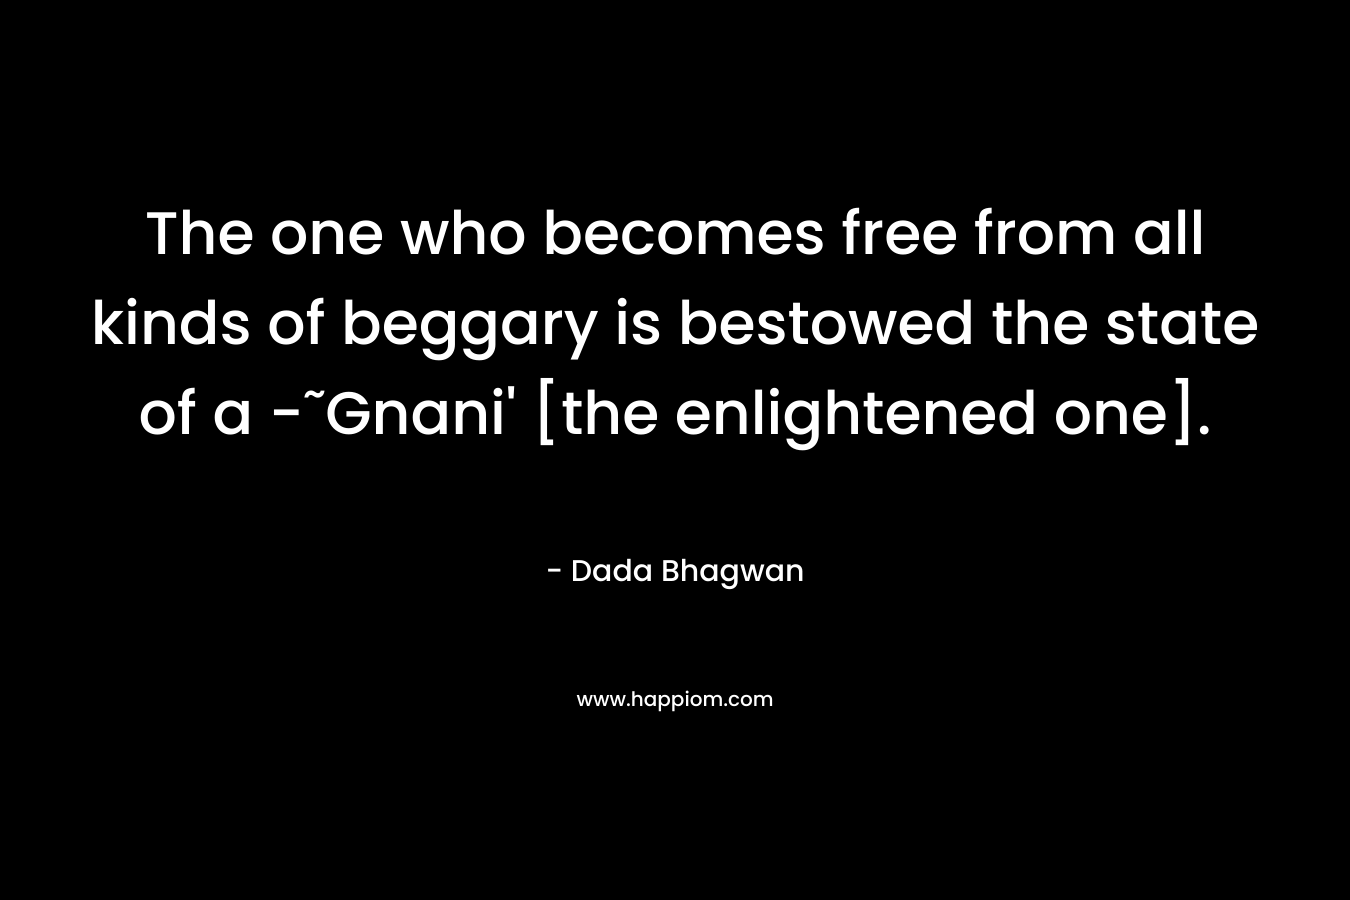 The one who becomes free from all kinds of beggary is bestowed the state of a -˜Gnani’ [the enlightened one]. – Dada Bhagwan